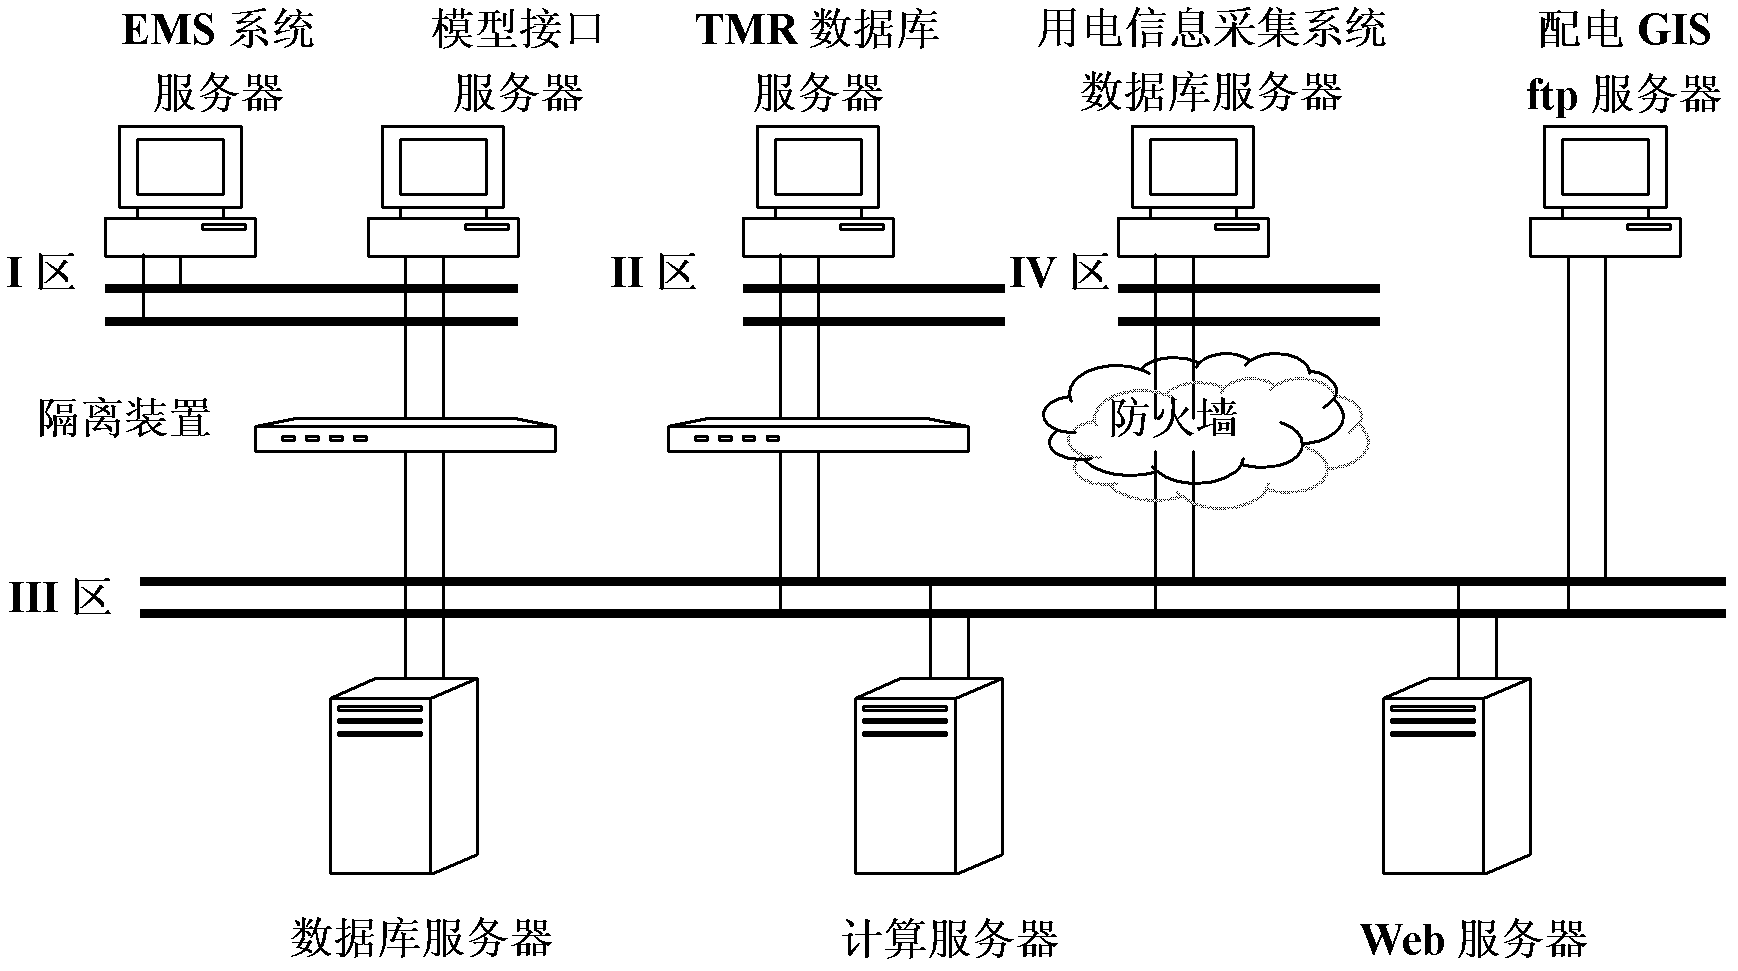 Transmission and distribution network integration comprehensive line loss management analysis system and processing flow thereof